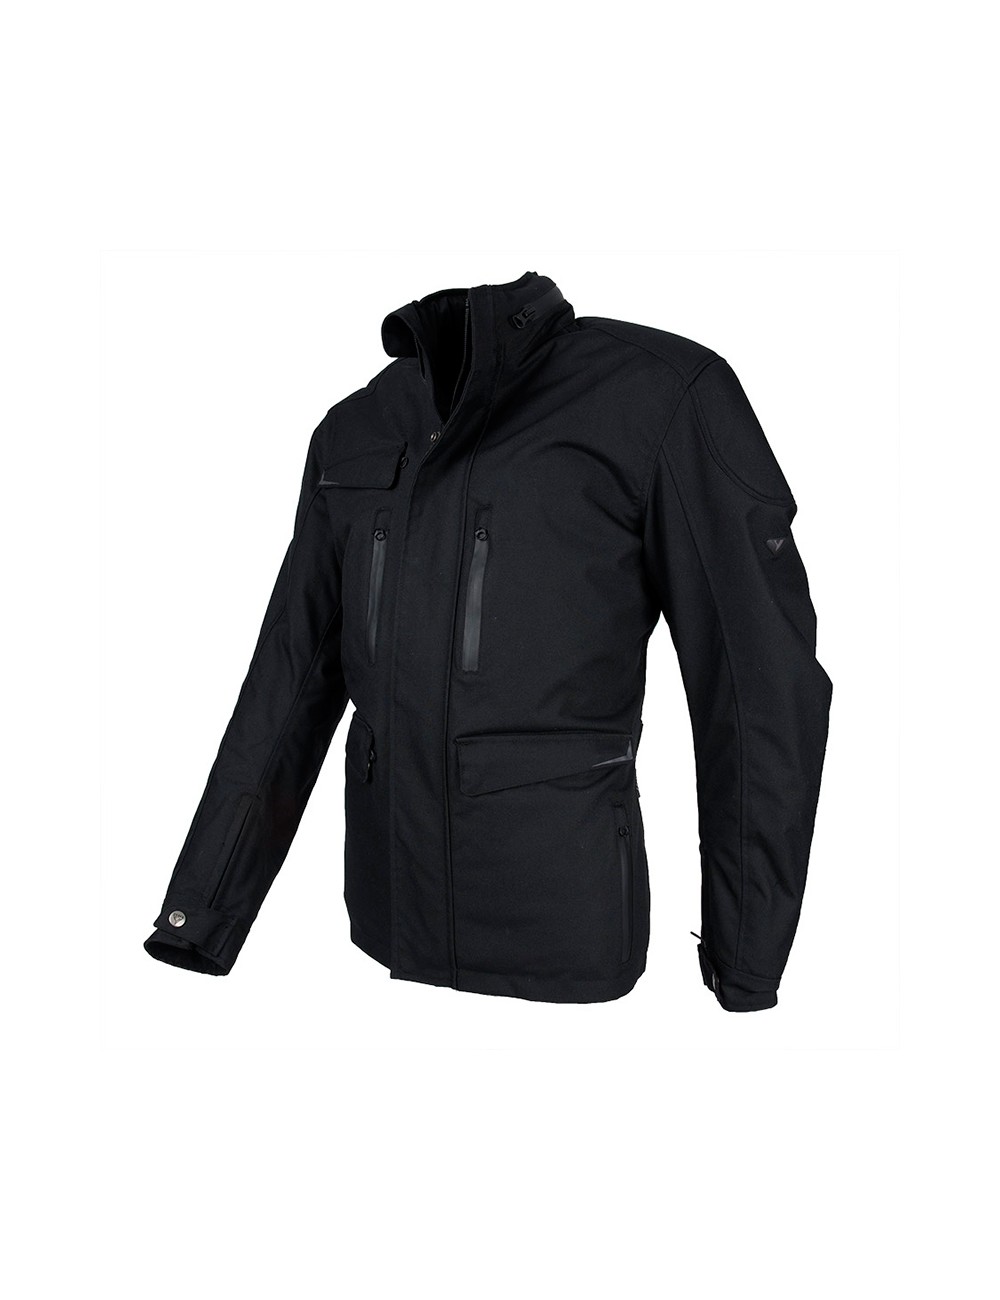 CHAQUETA BY CITY WINTER ROUTE